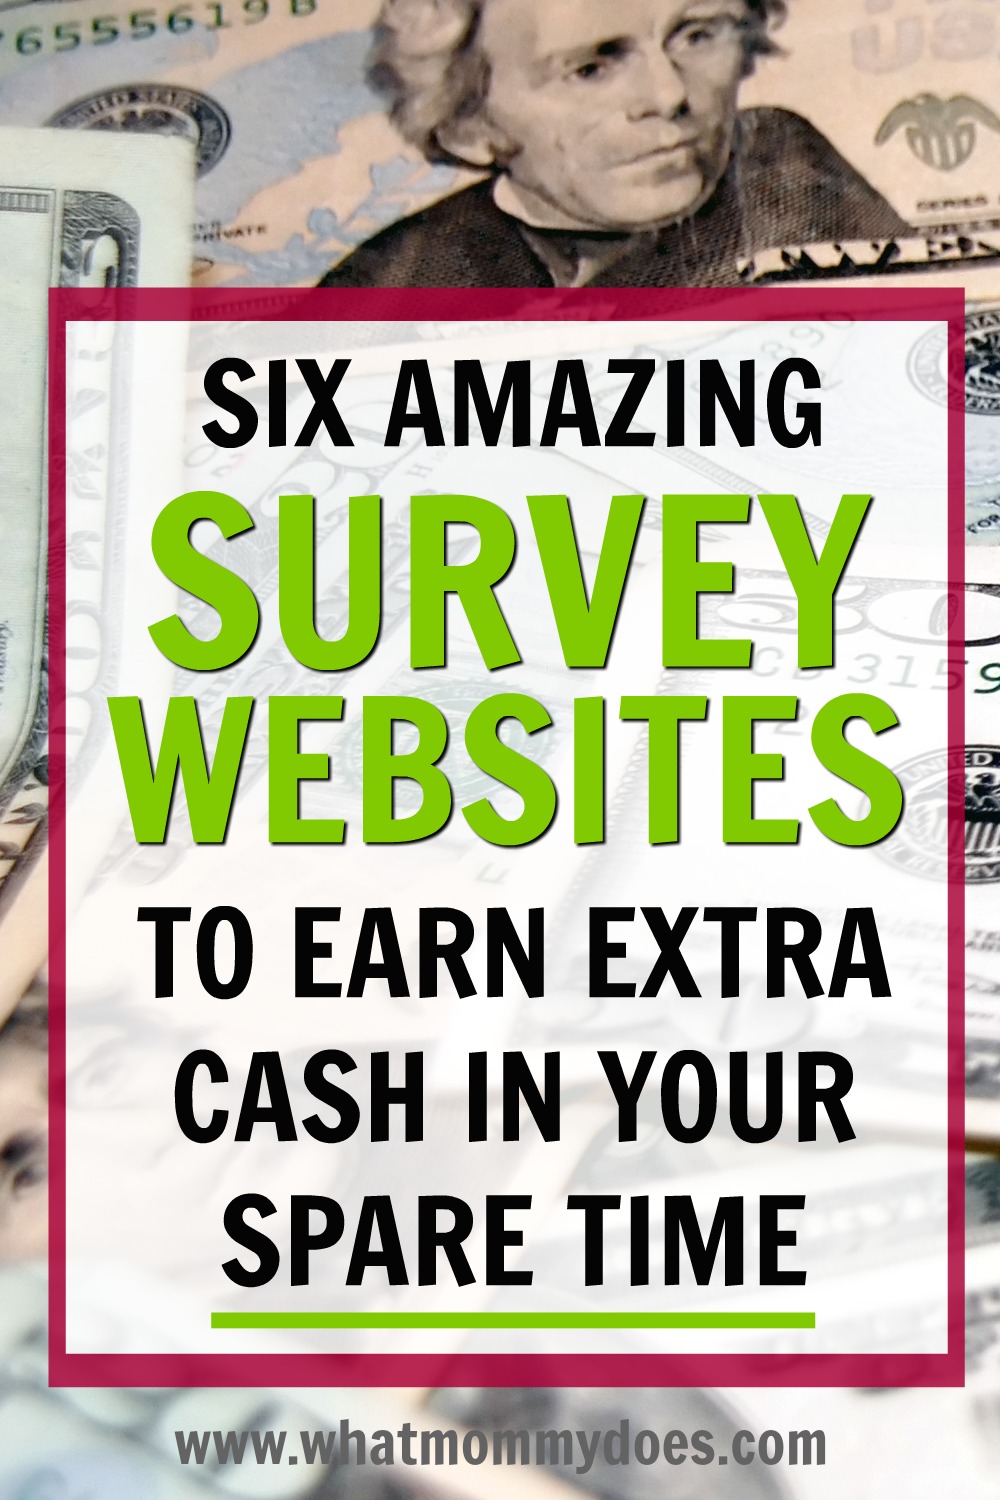 Looking for a way to make extra money each month that doesn't require a lot of work up front? Online survey sites are perfect for this!!! These are the best 6 free survey websites according to my rep - you can make extra cash answering questions & giving your opinion in your spare time. Goodness knows, you could even earn extra money while you're standing in line at the grocery store! | quick money making ideas, extra money monthly, easy side gigs